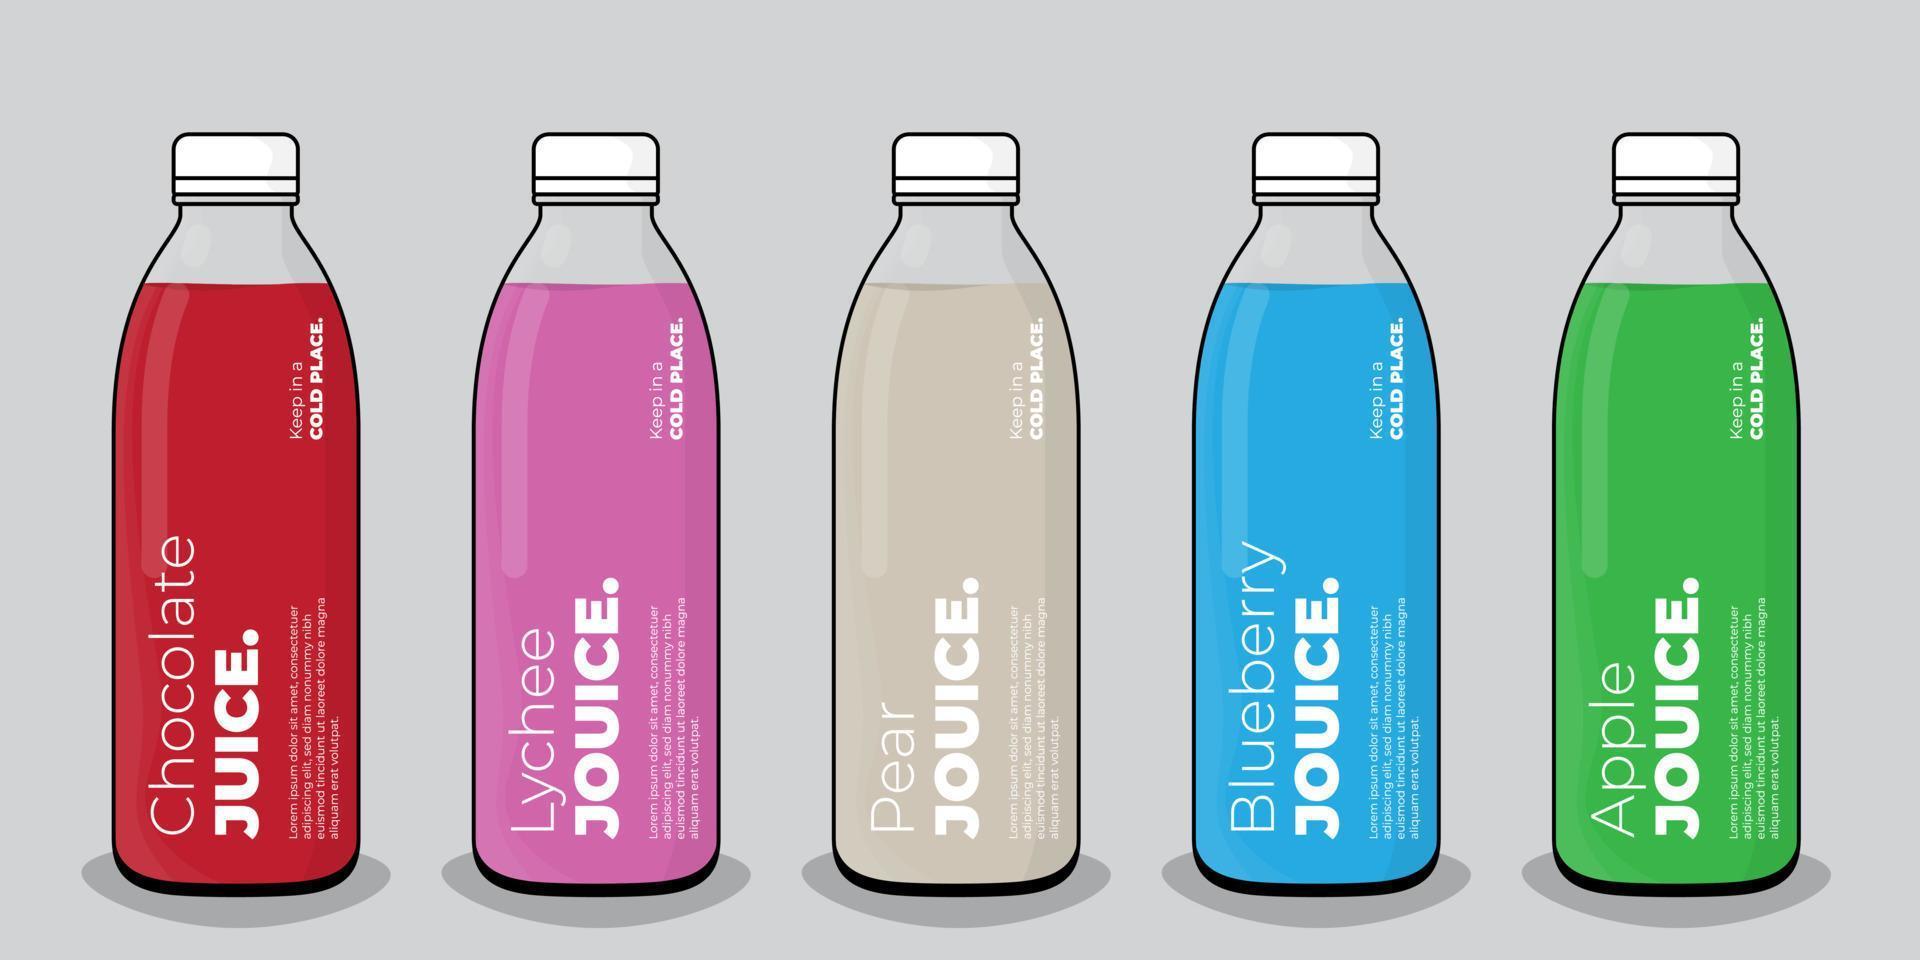 Milk or juice packaging template design with bottle in multicolor choice design vector